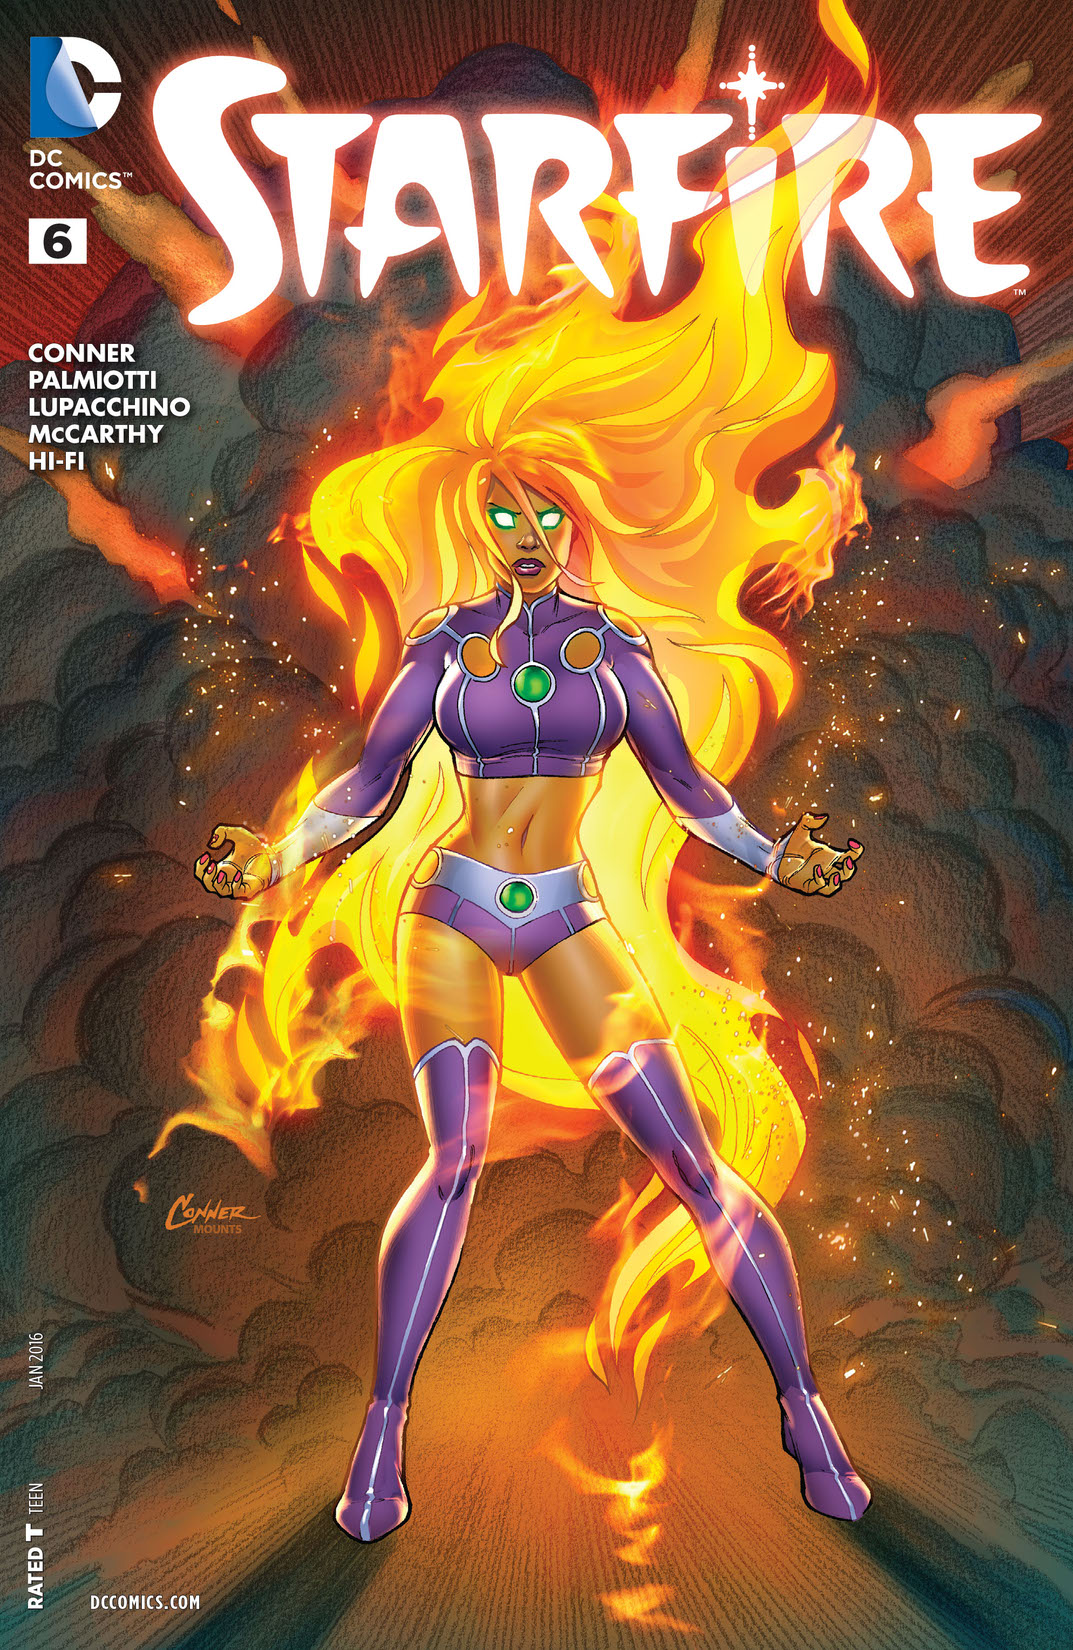 Starfire #6 preview images